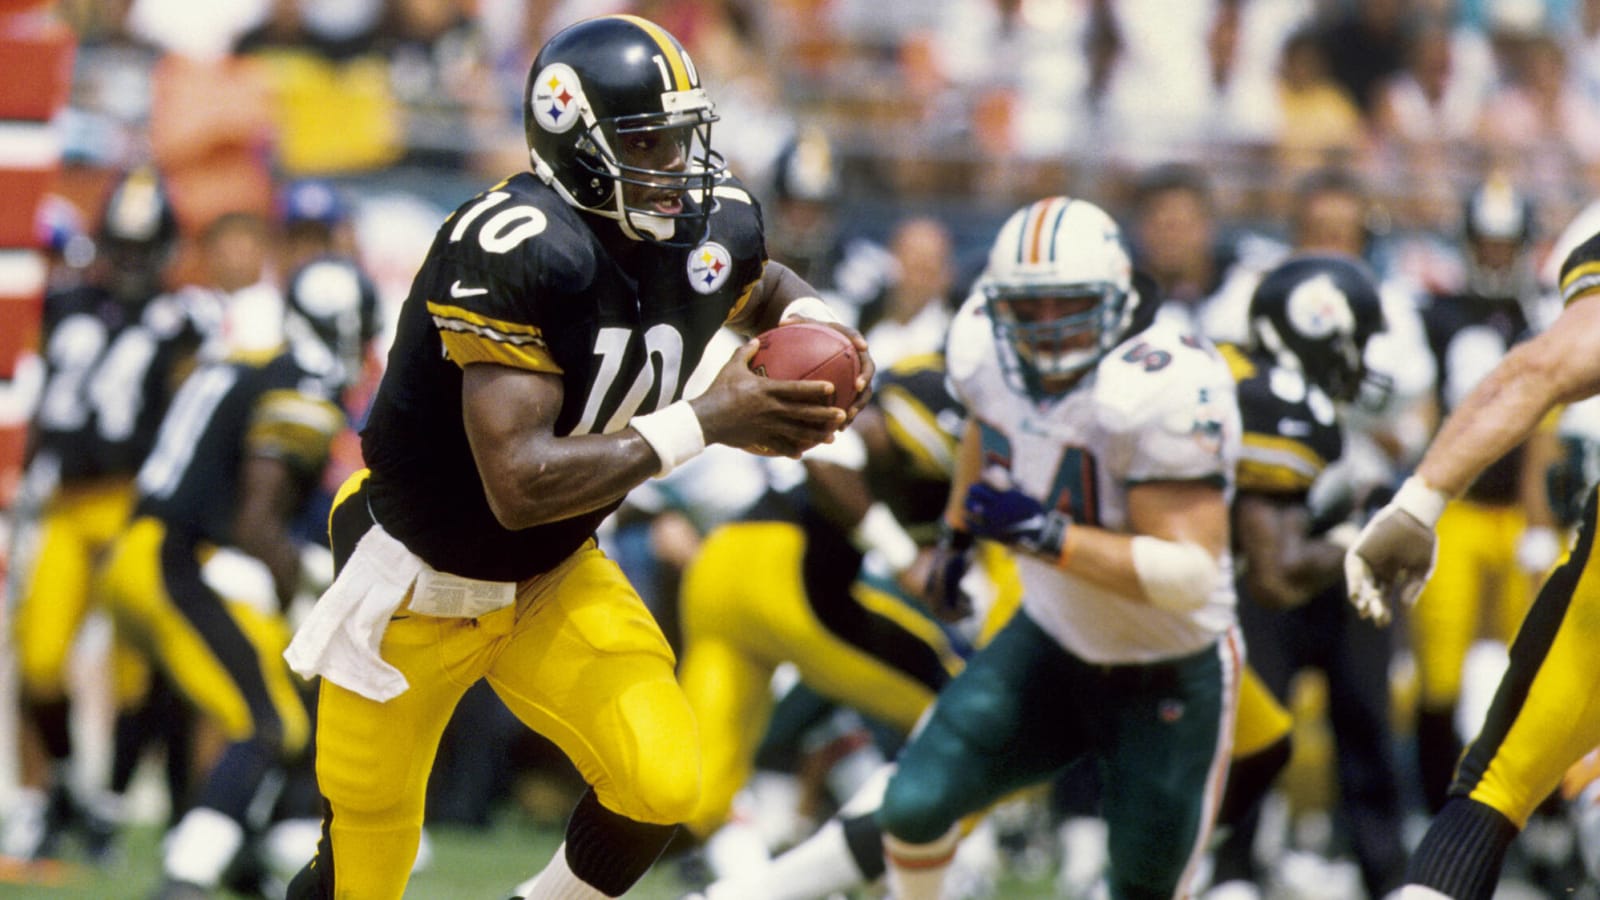 Former Steelers QB Kordell Stewart Tells Revealing Story About The Origin Of Him Playing Receiver